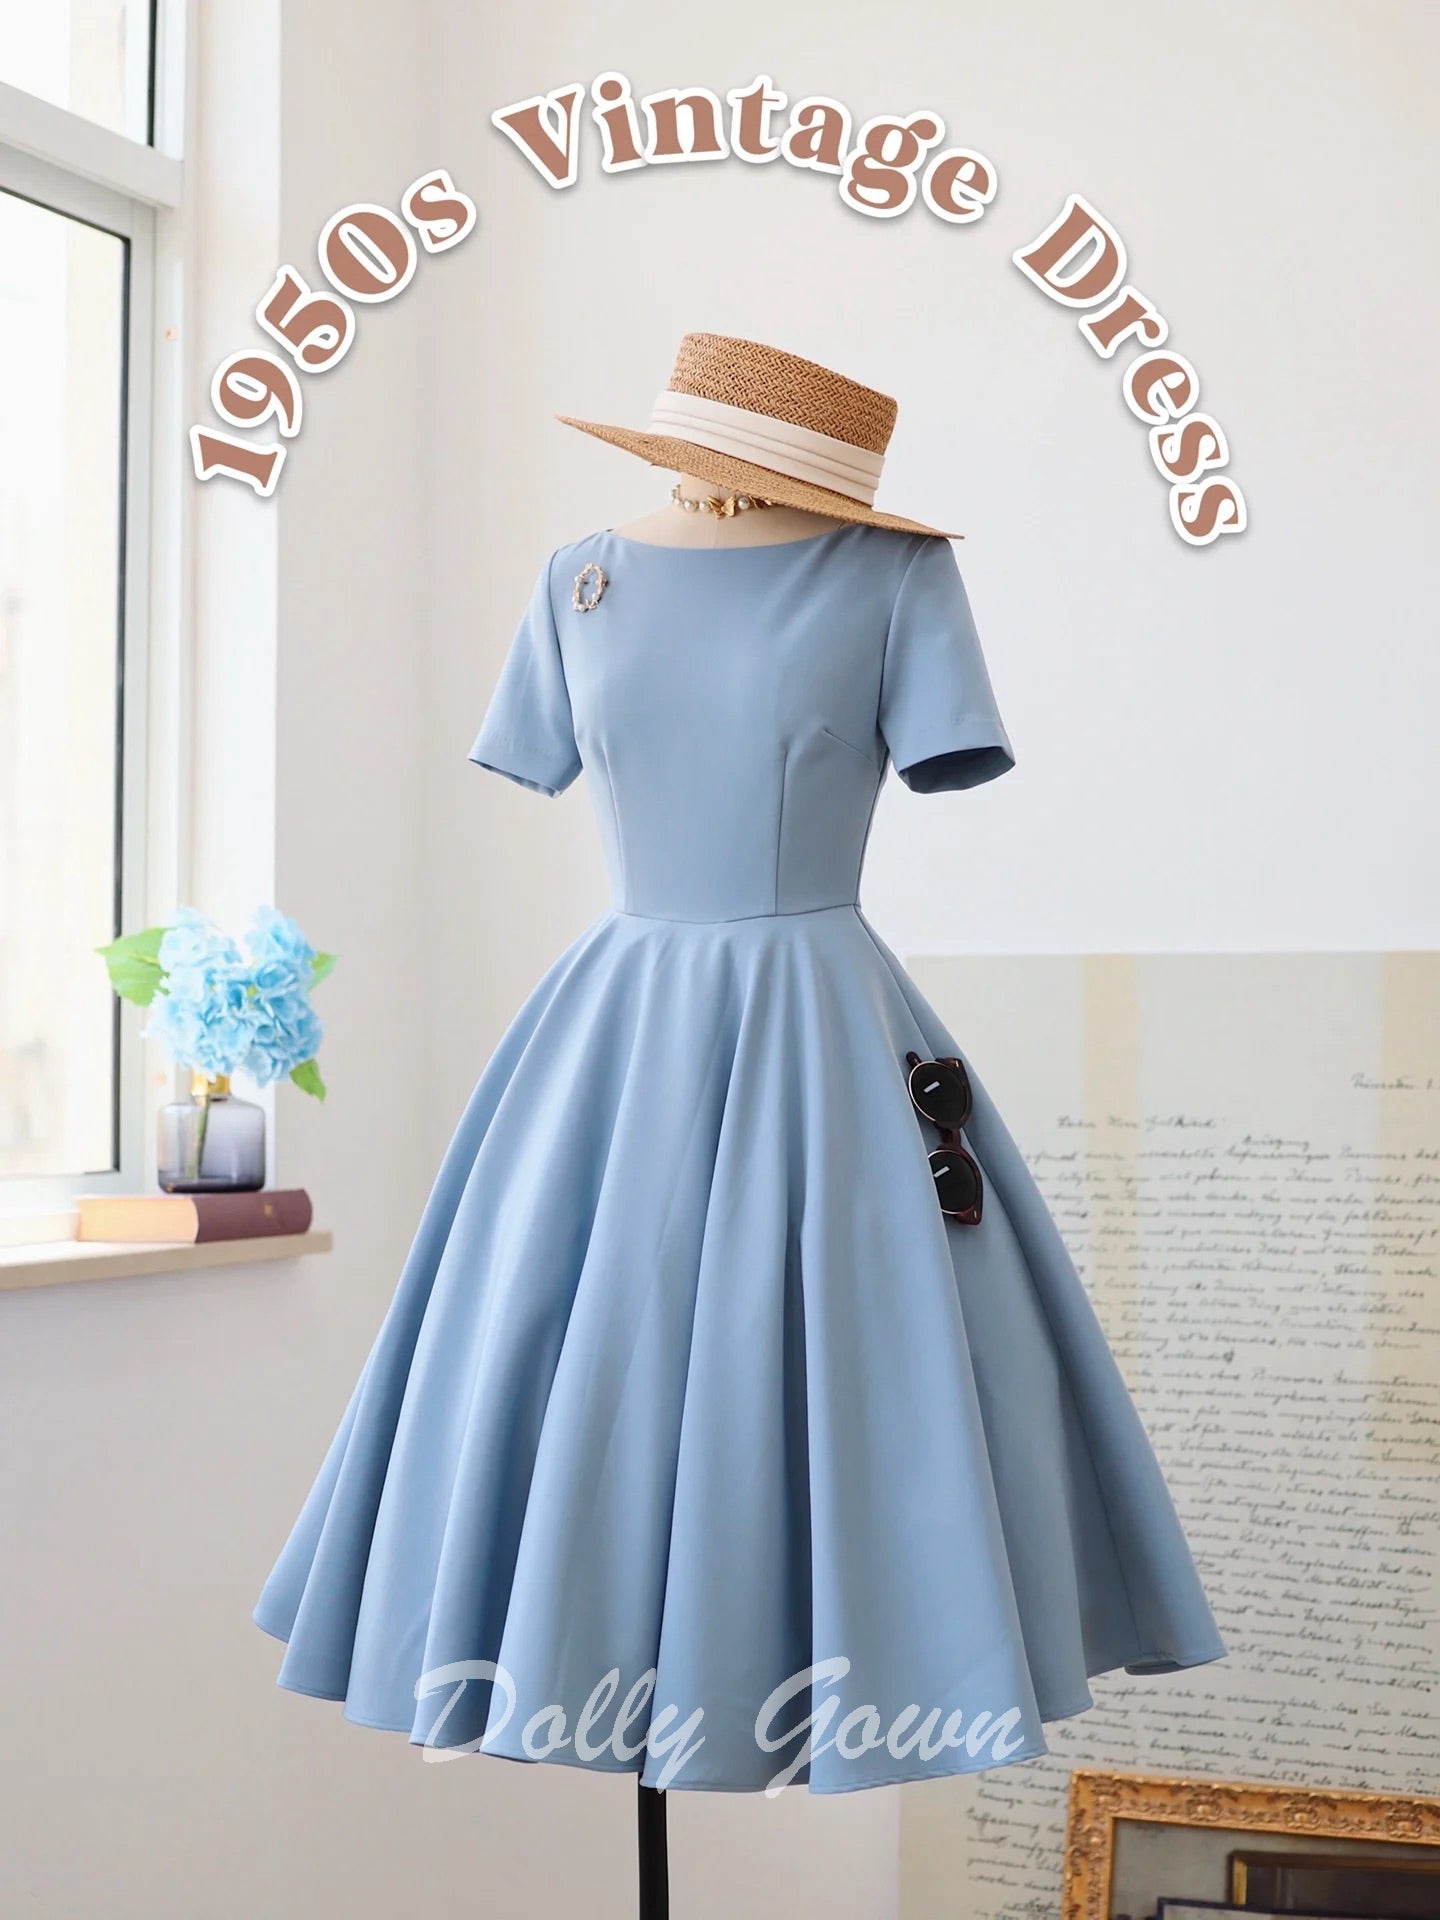 Light Blue Short 1950s Vintage Style Dress with Short Sleeves